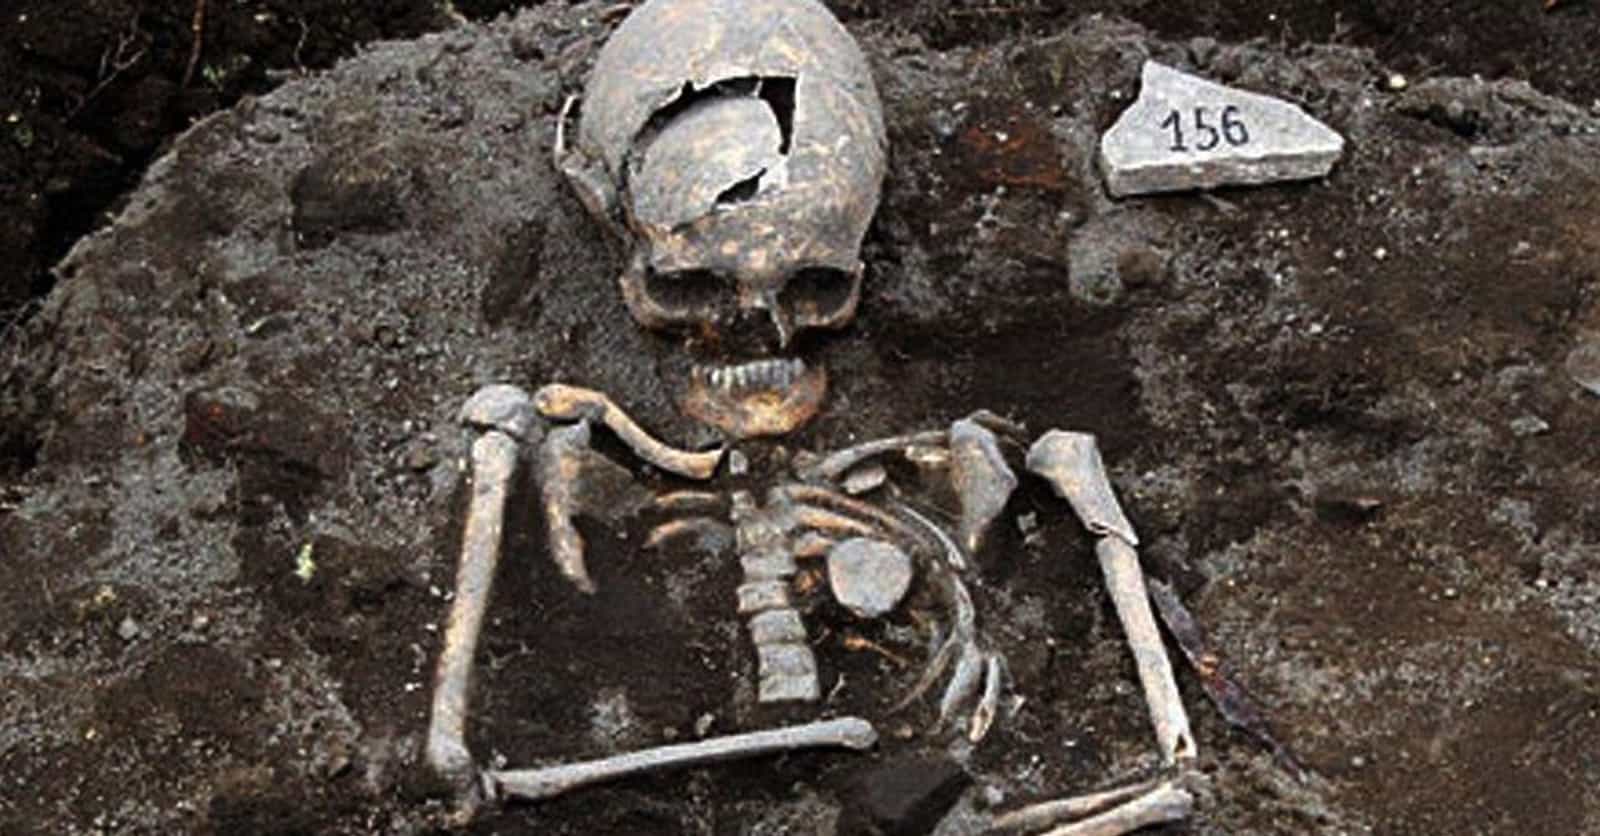 Evidence That Hundreds Of People In Medieval Europe Were Given Gruesome "Vampire Burials"